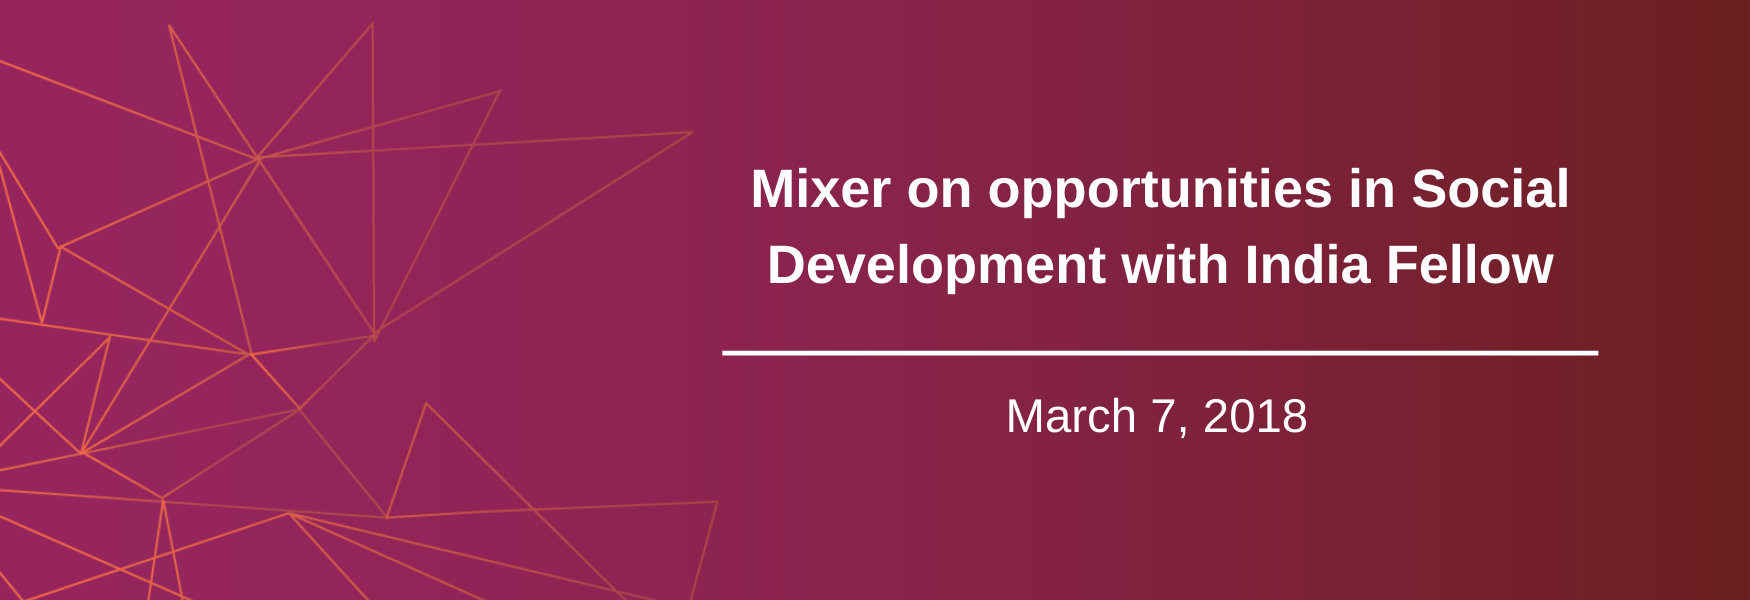 Mixer on opportunities in Social Development with India Fellow